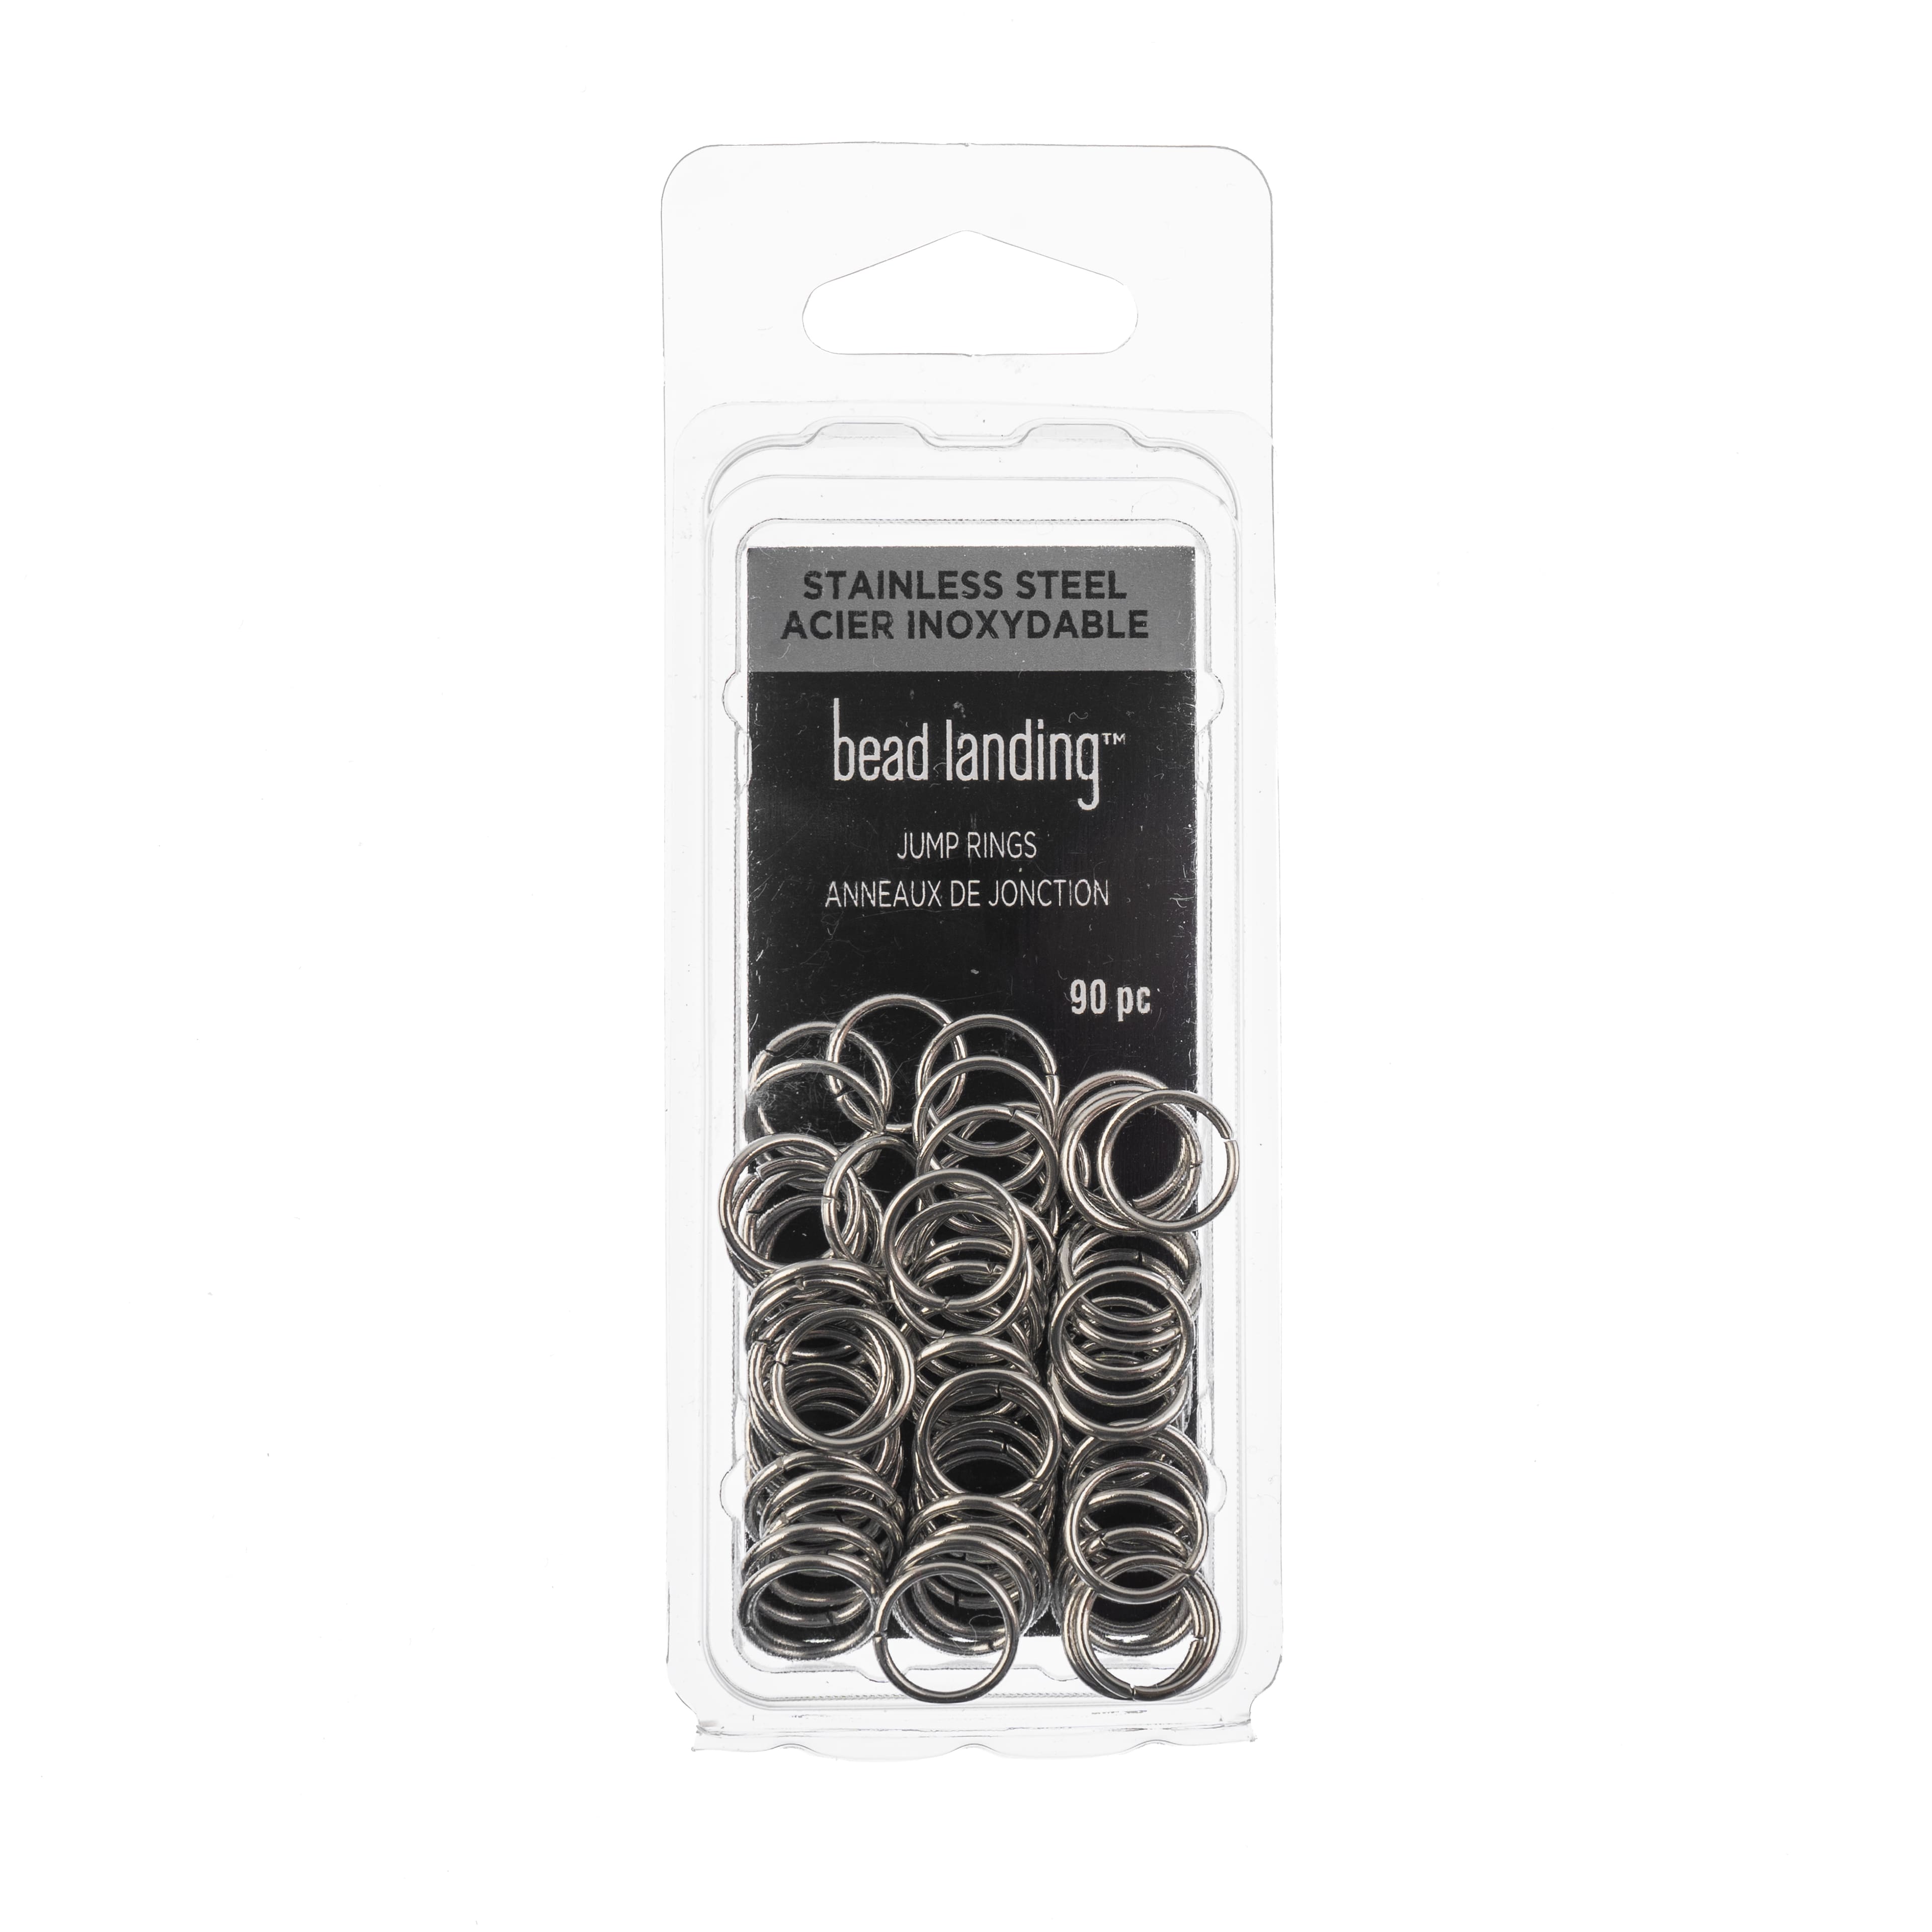 Assorted Jump Rings by Bead Landing in Silver | Michaels